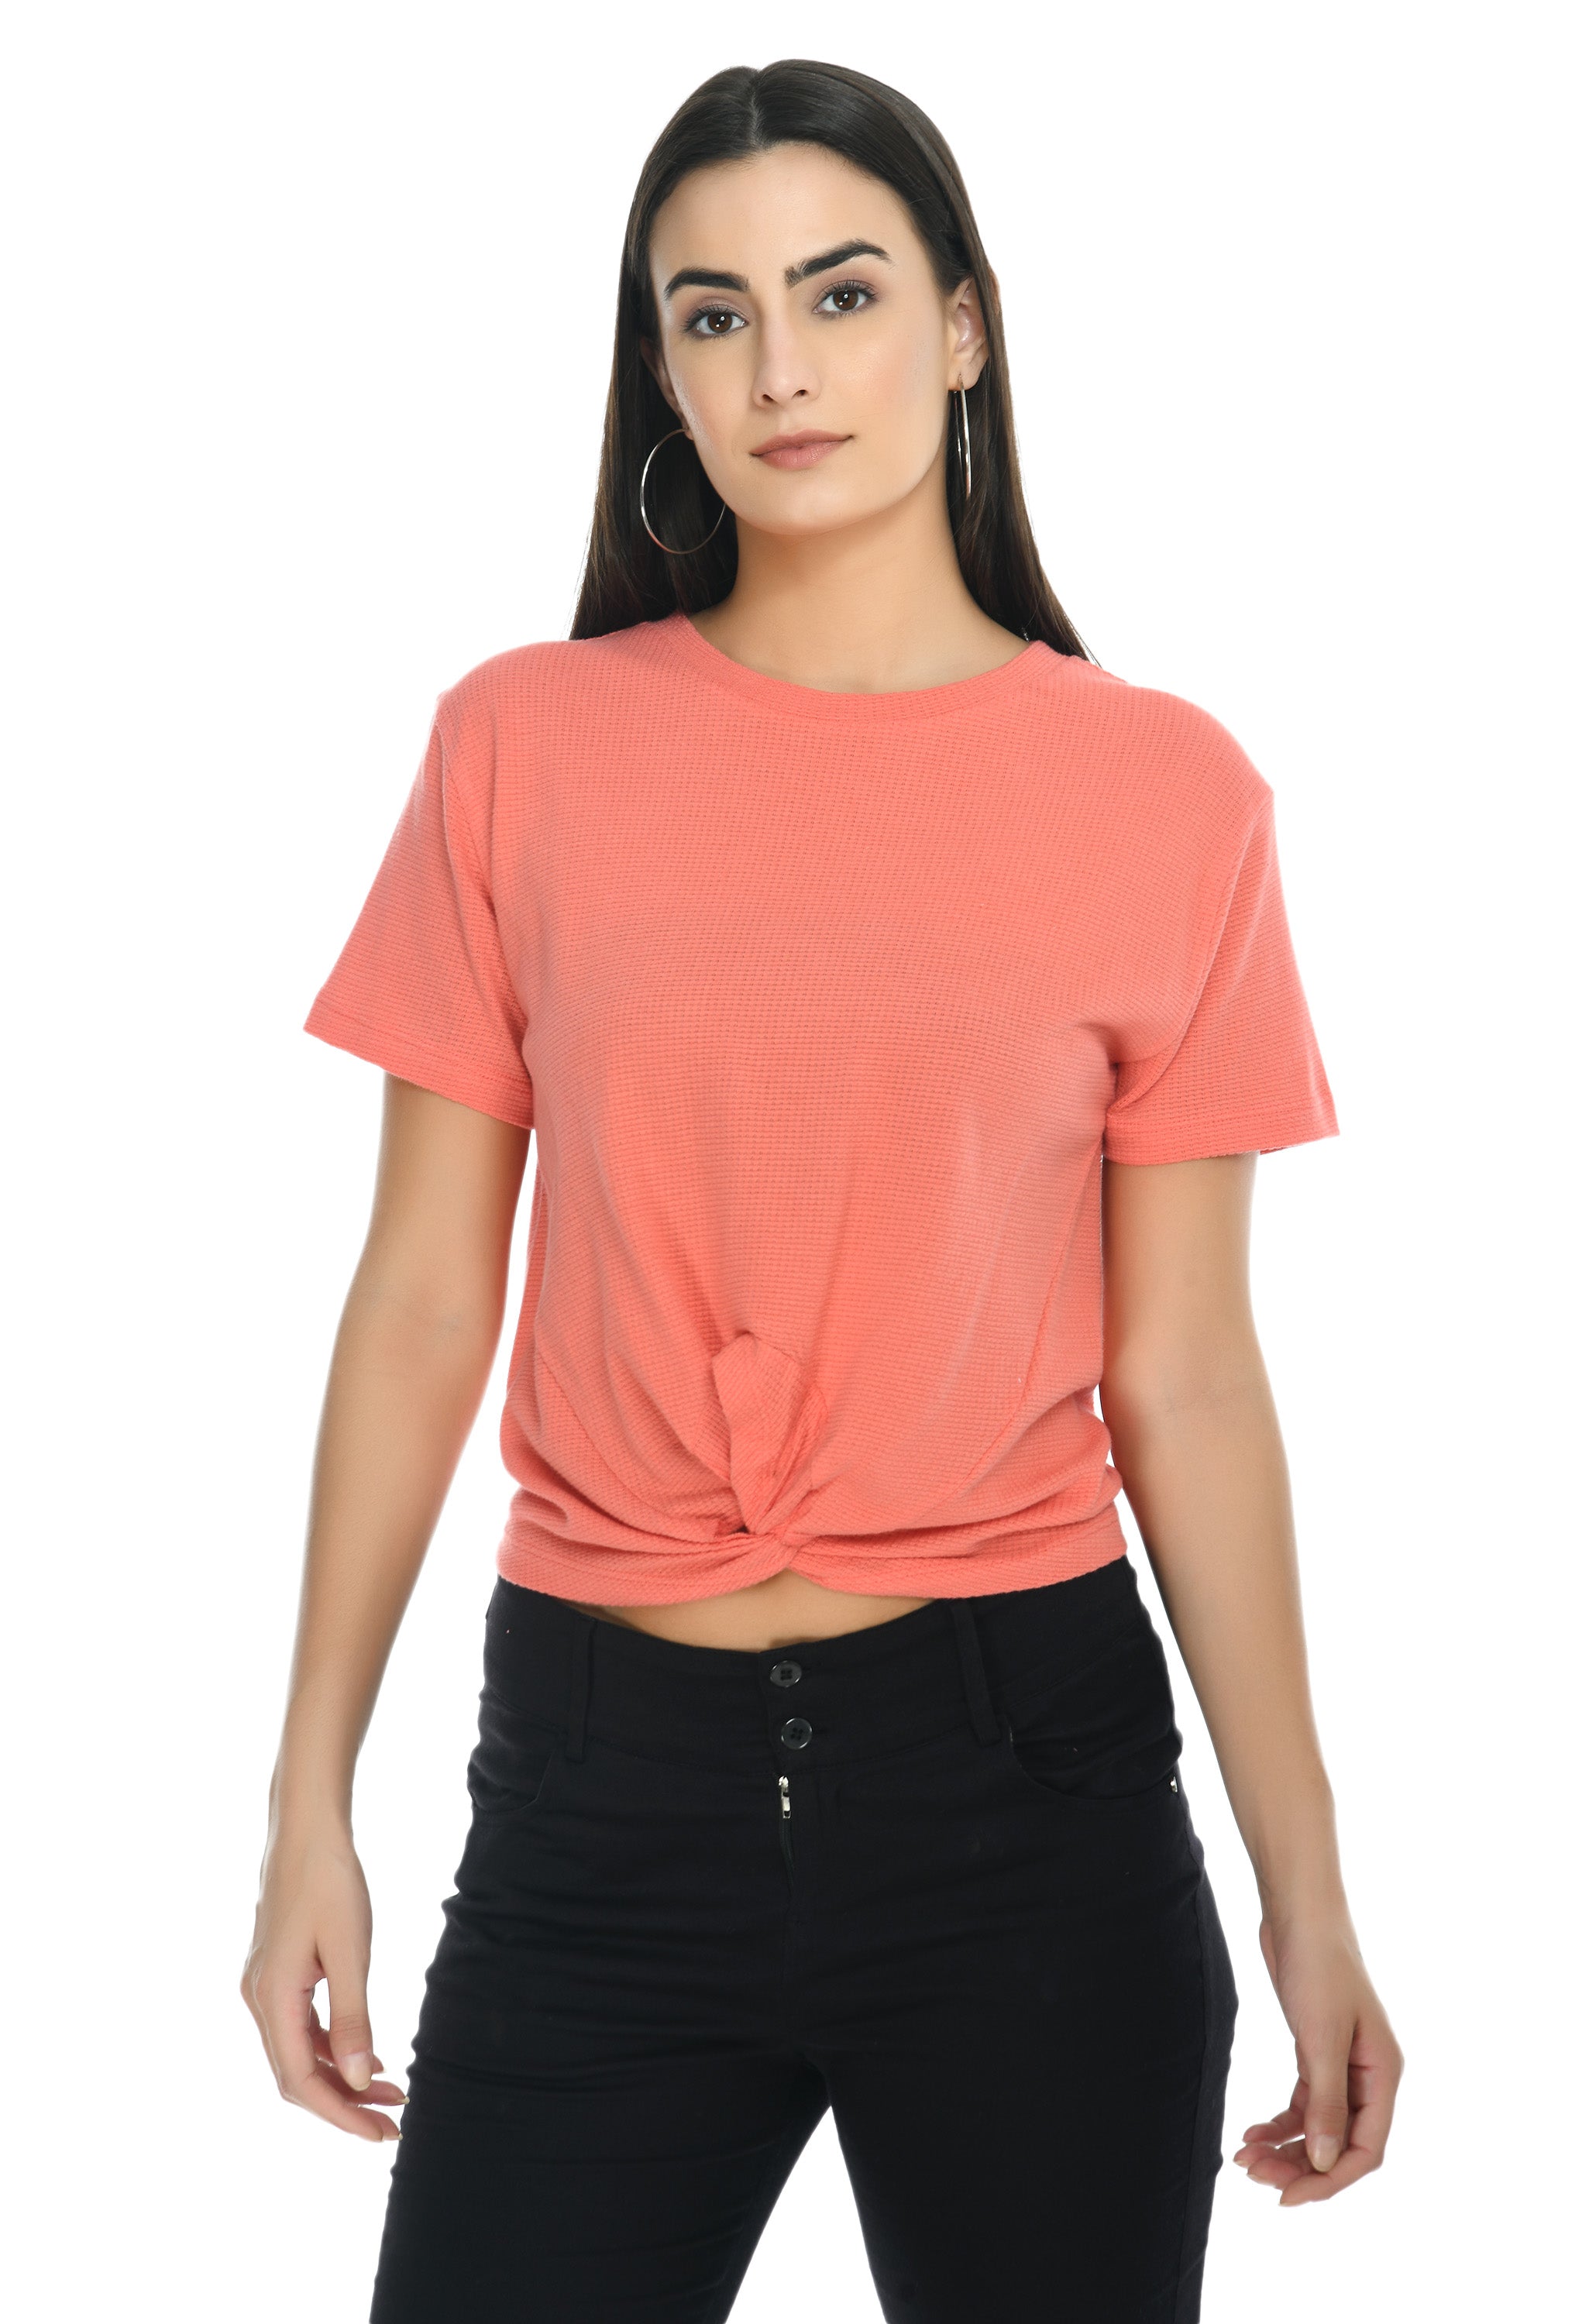 Rue Collection Round Neck Short Sleeve Crop Top for Women & Girl